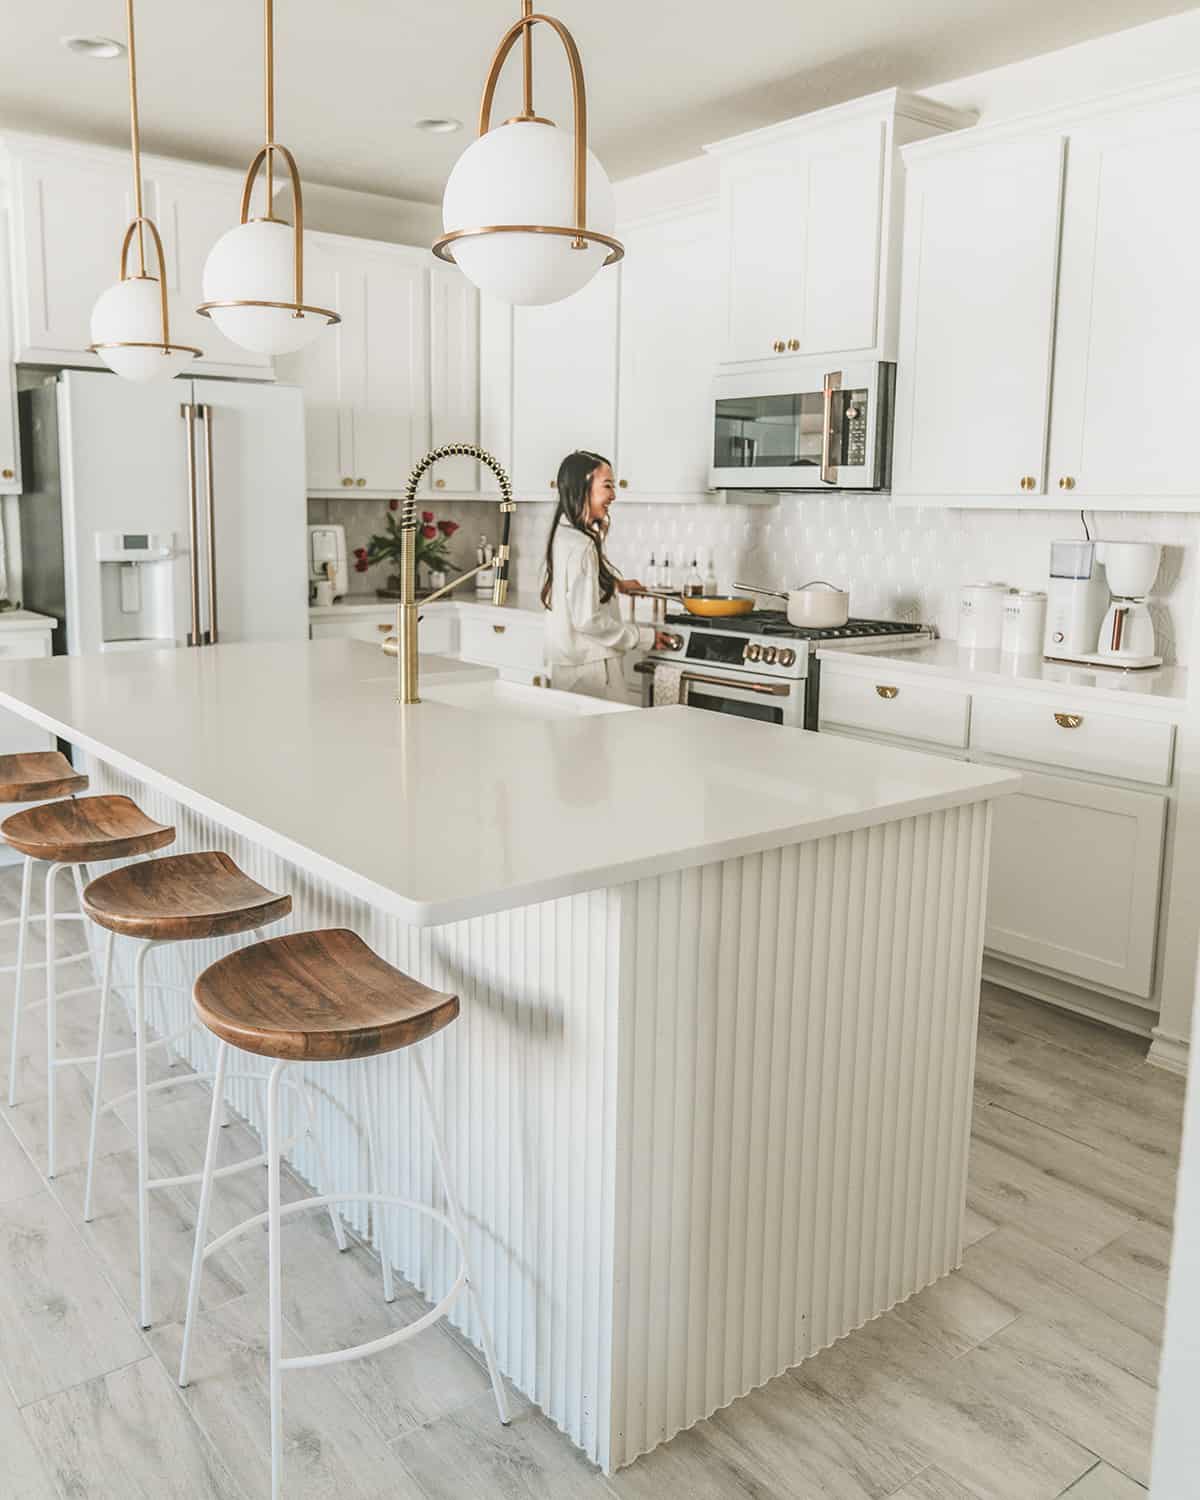 All white kitchen with white cabinets and appliances